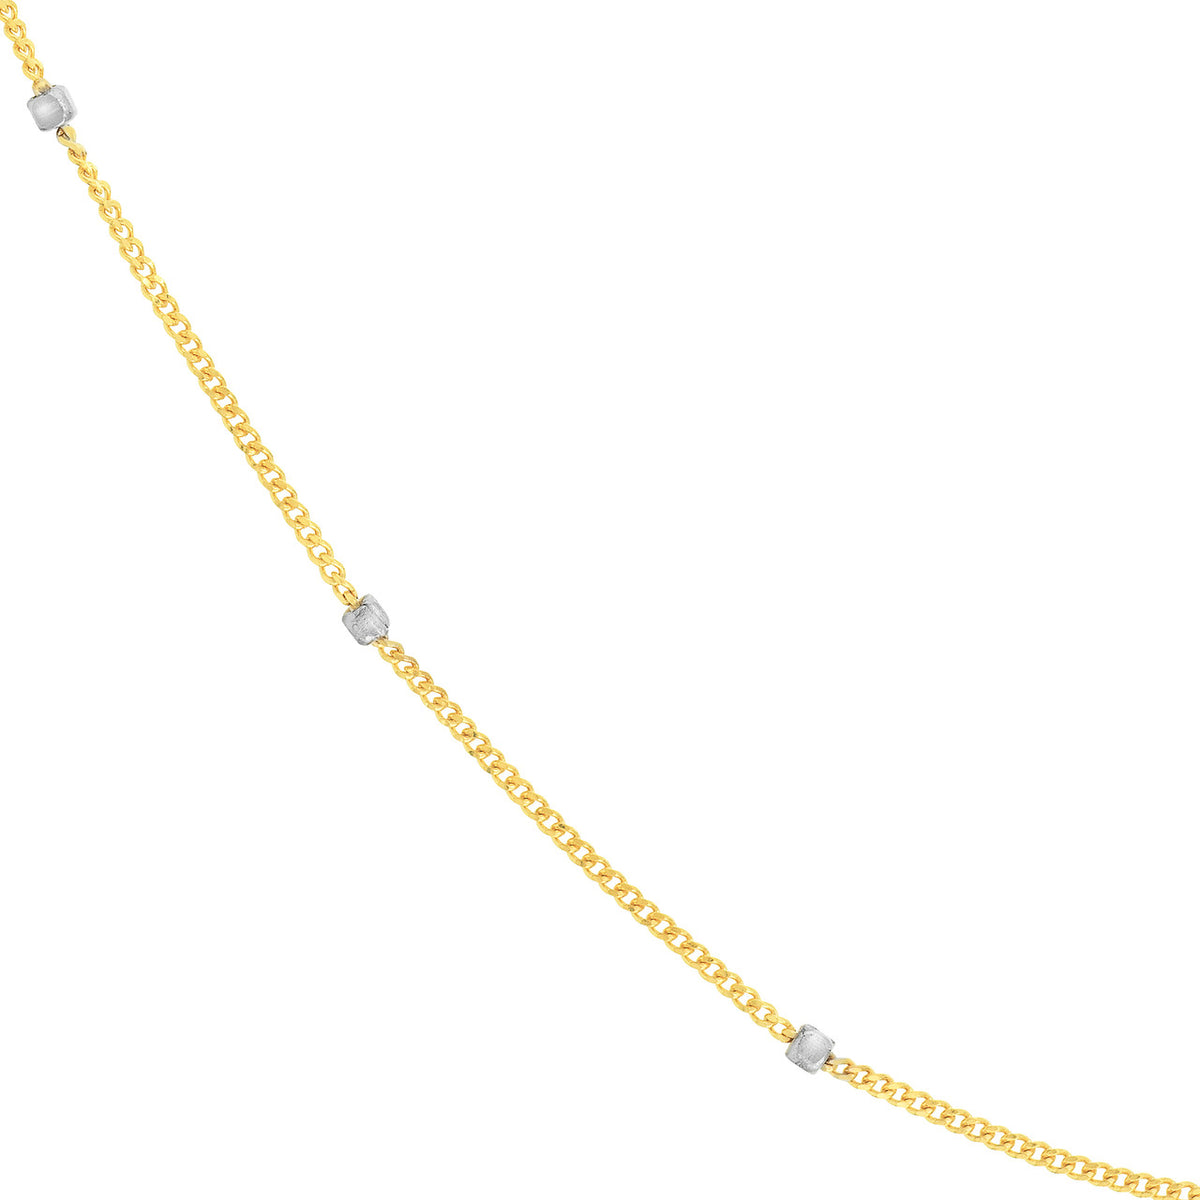 Solid 14K Gold Two-Tone Cube Saturn Chain Necklace with Lobster Lock